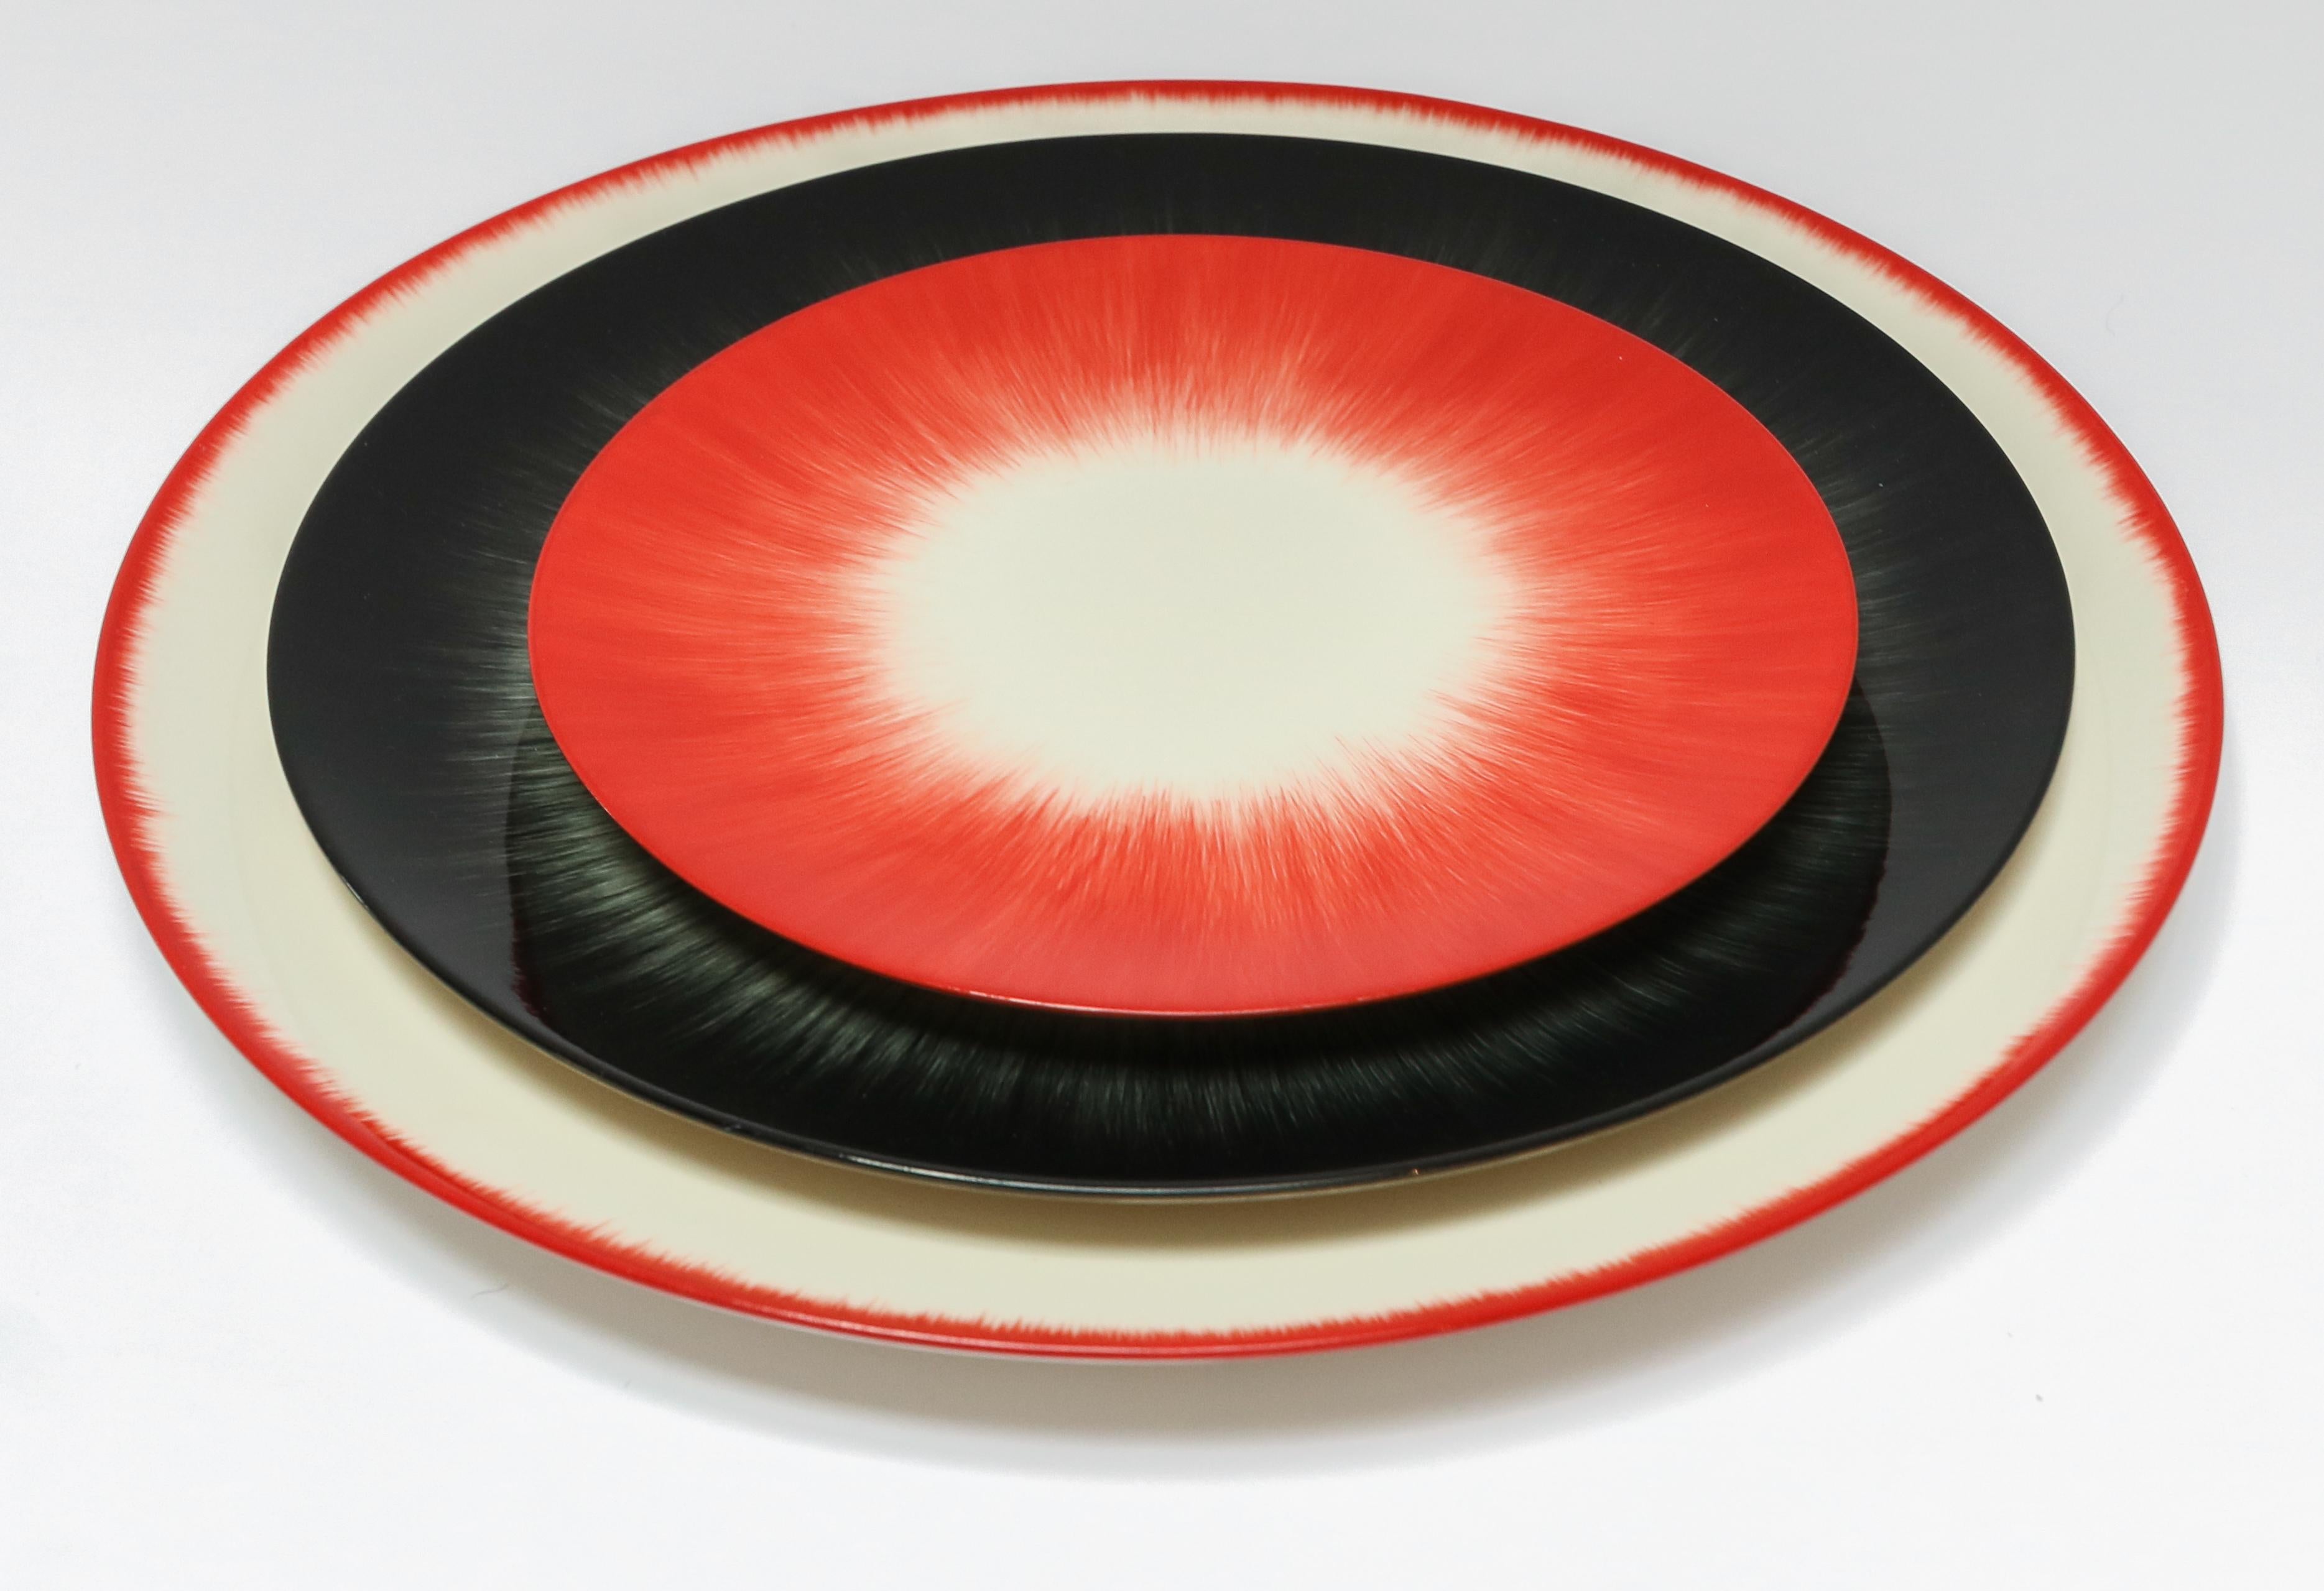 Ann Demeulemeester for Serax Dé Dessert Plate in Off White / Red 2